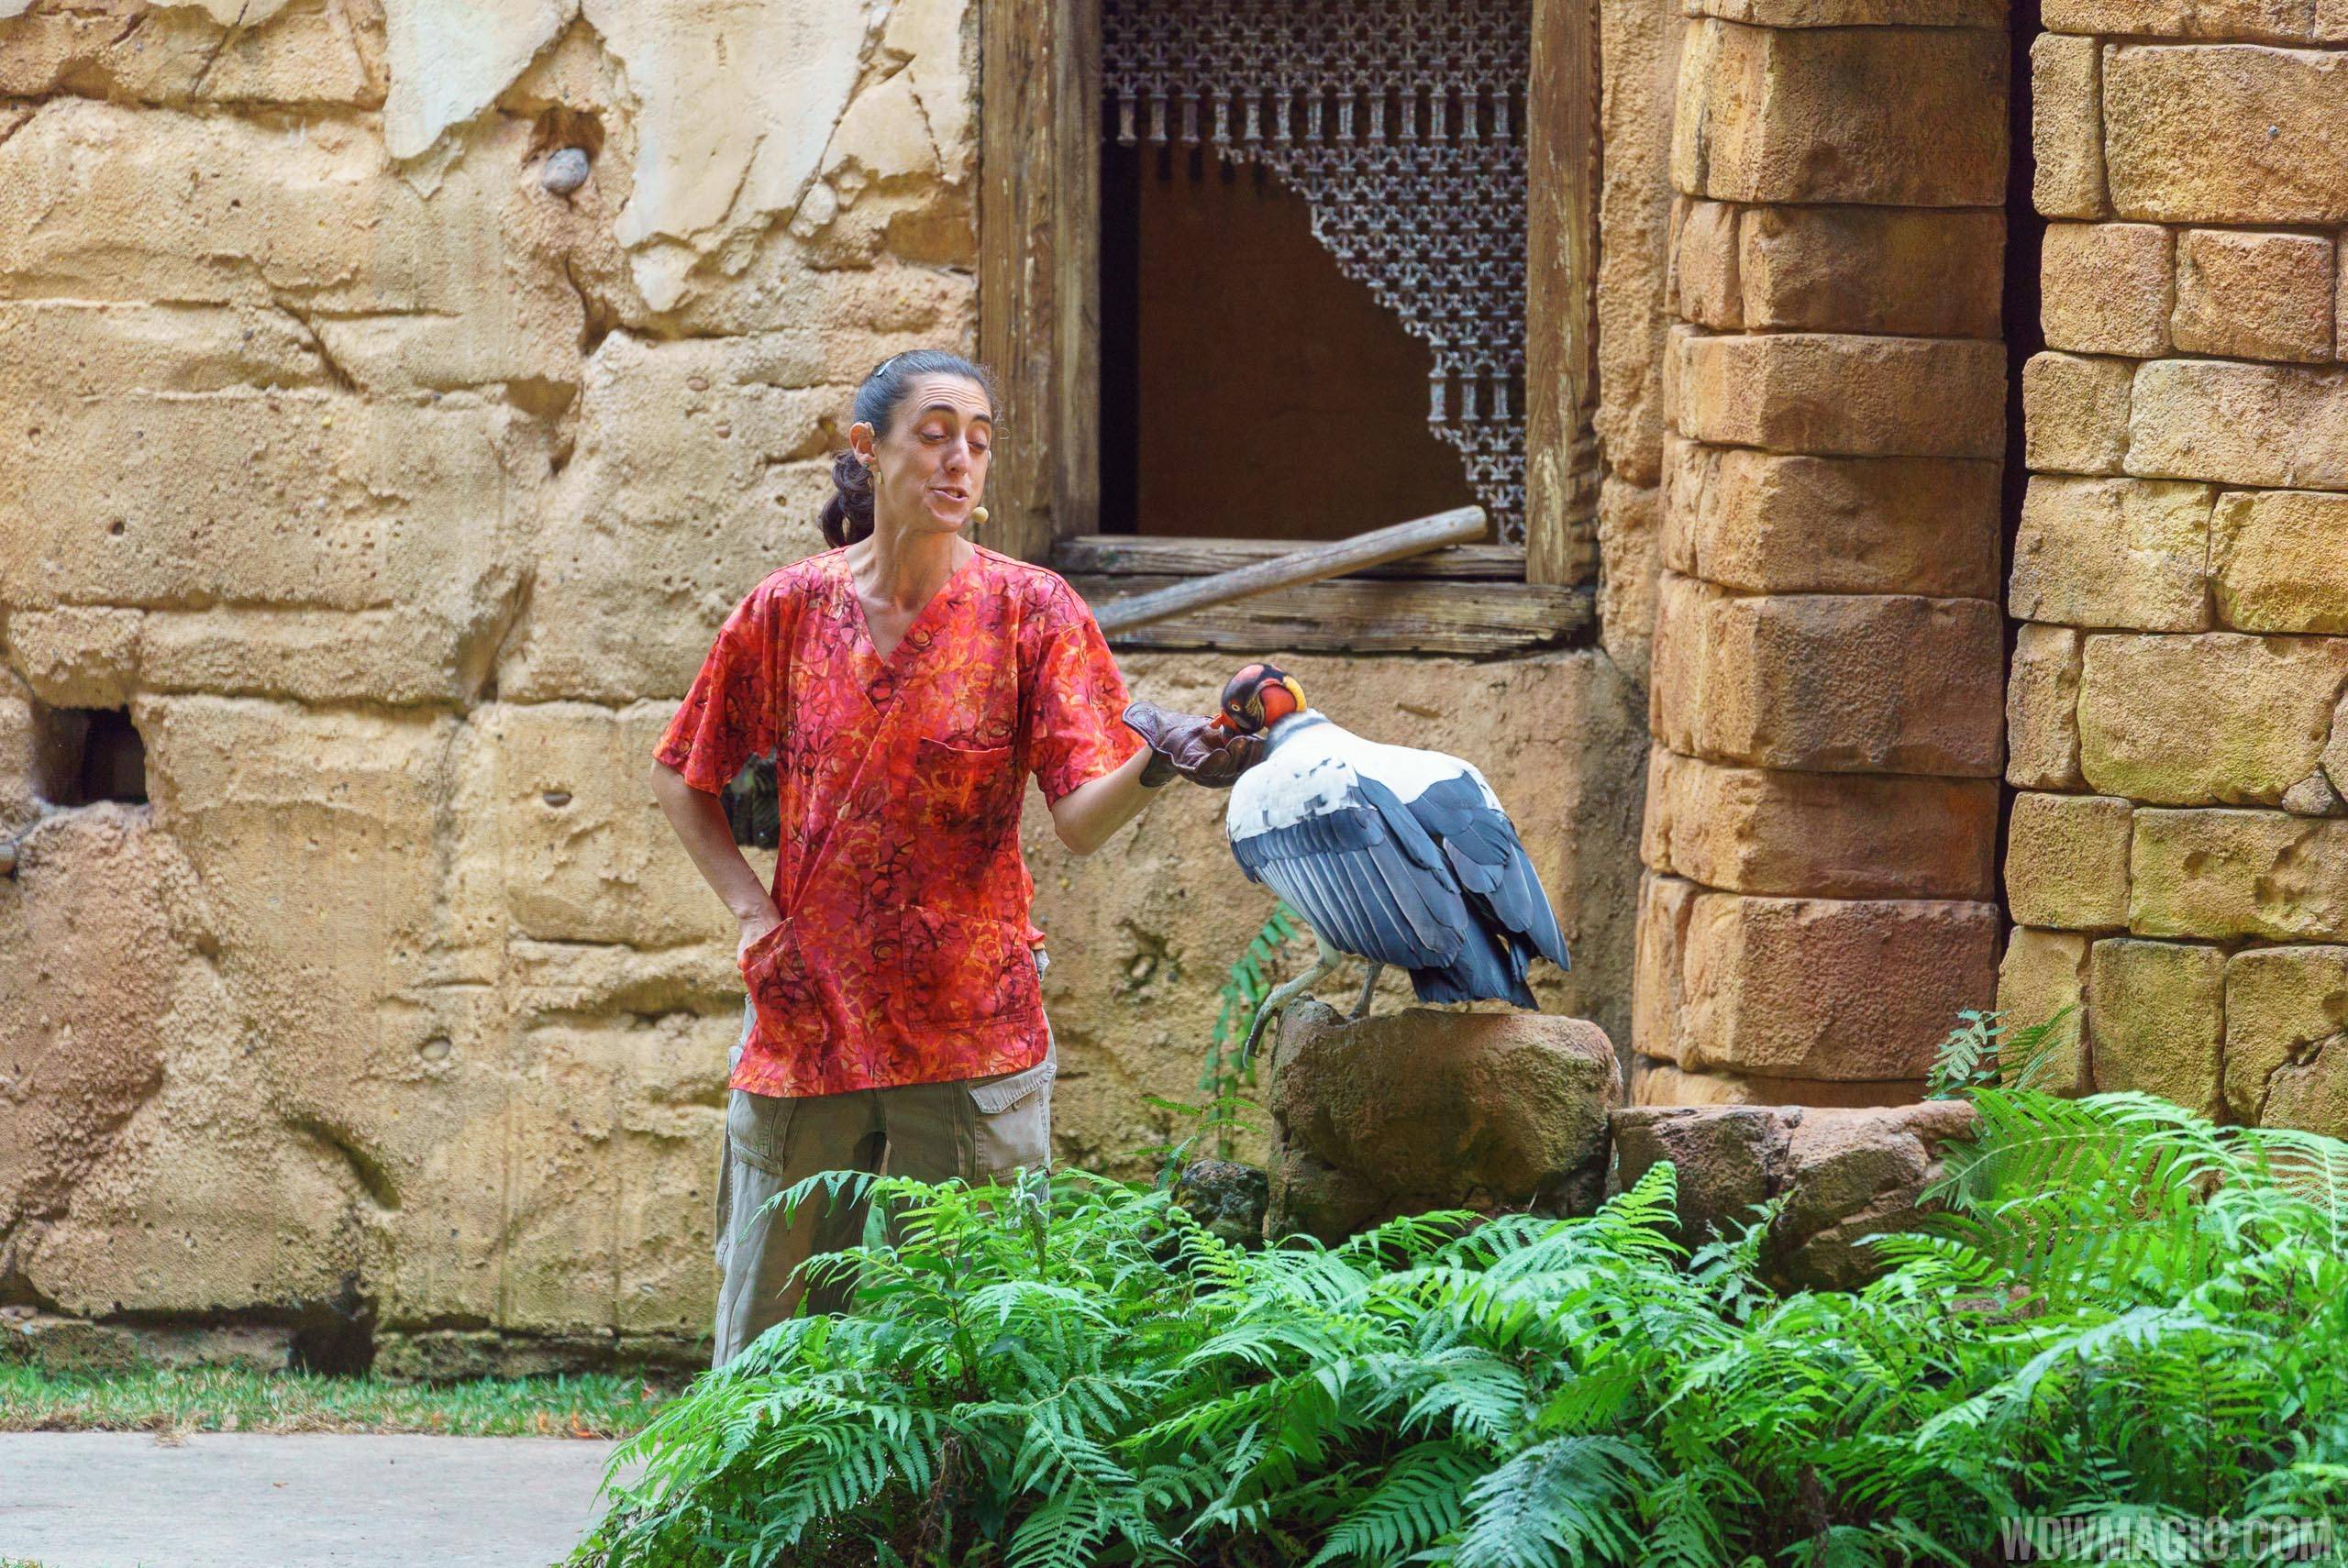 Flights of Wonder bird shows expand to other areas of Disney's Animal Kingdom